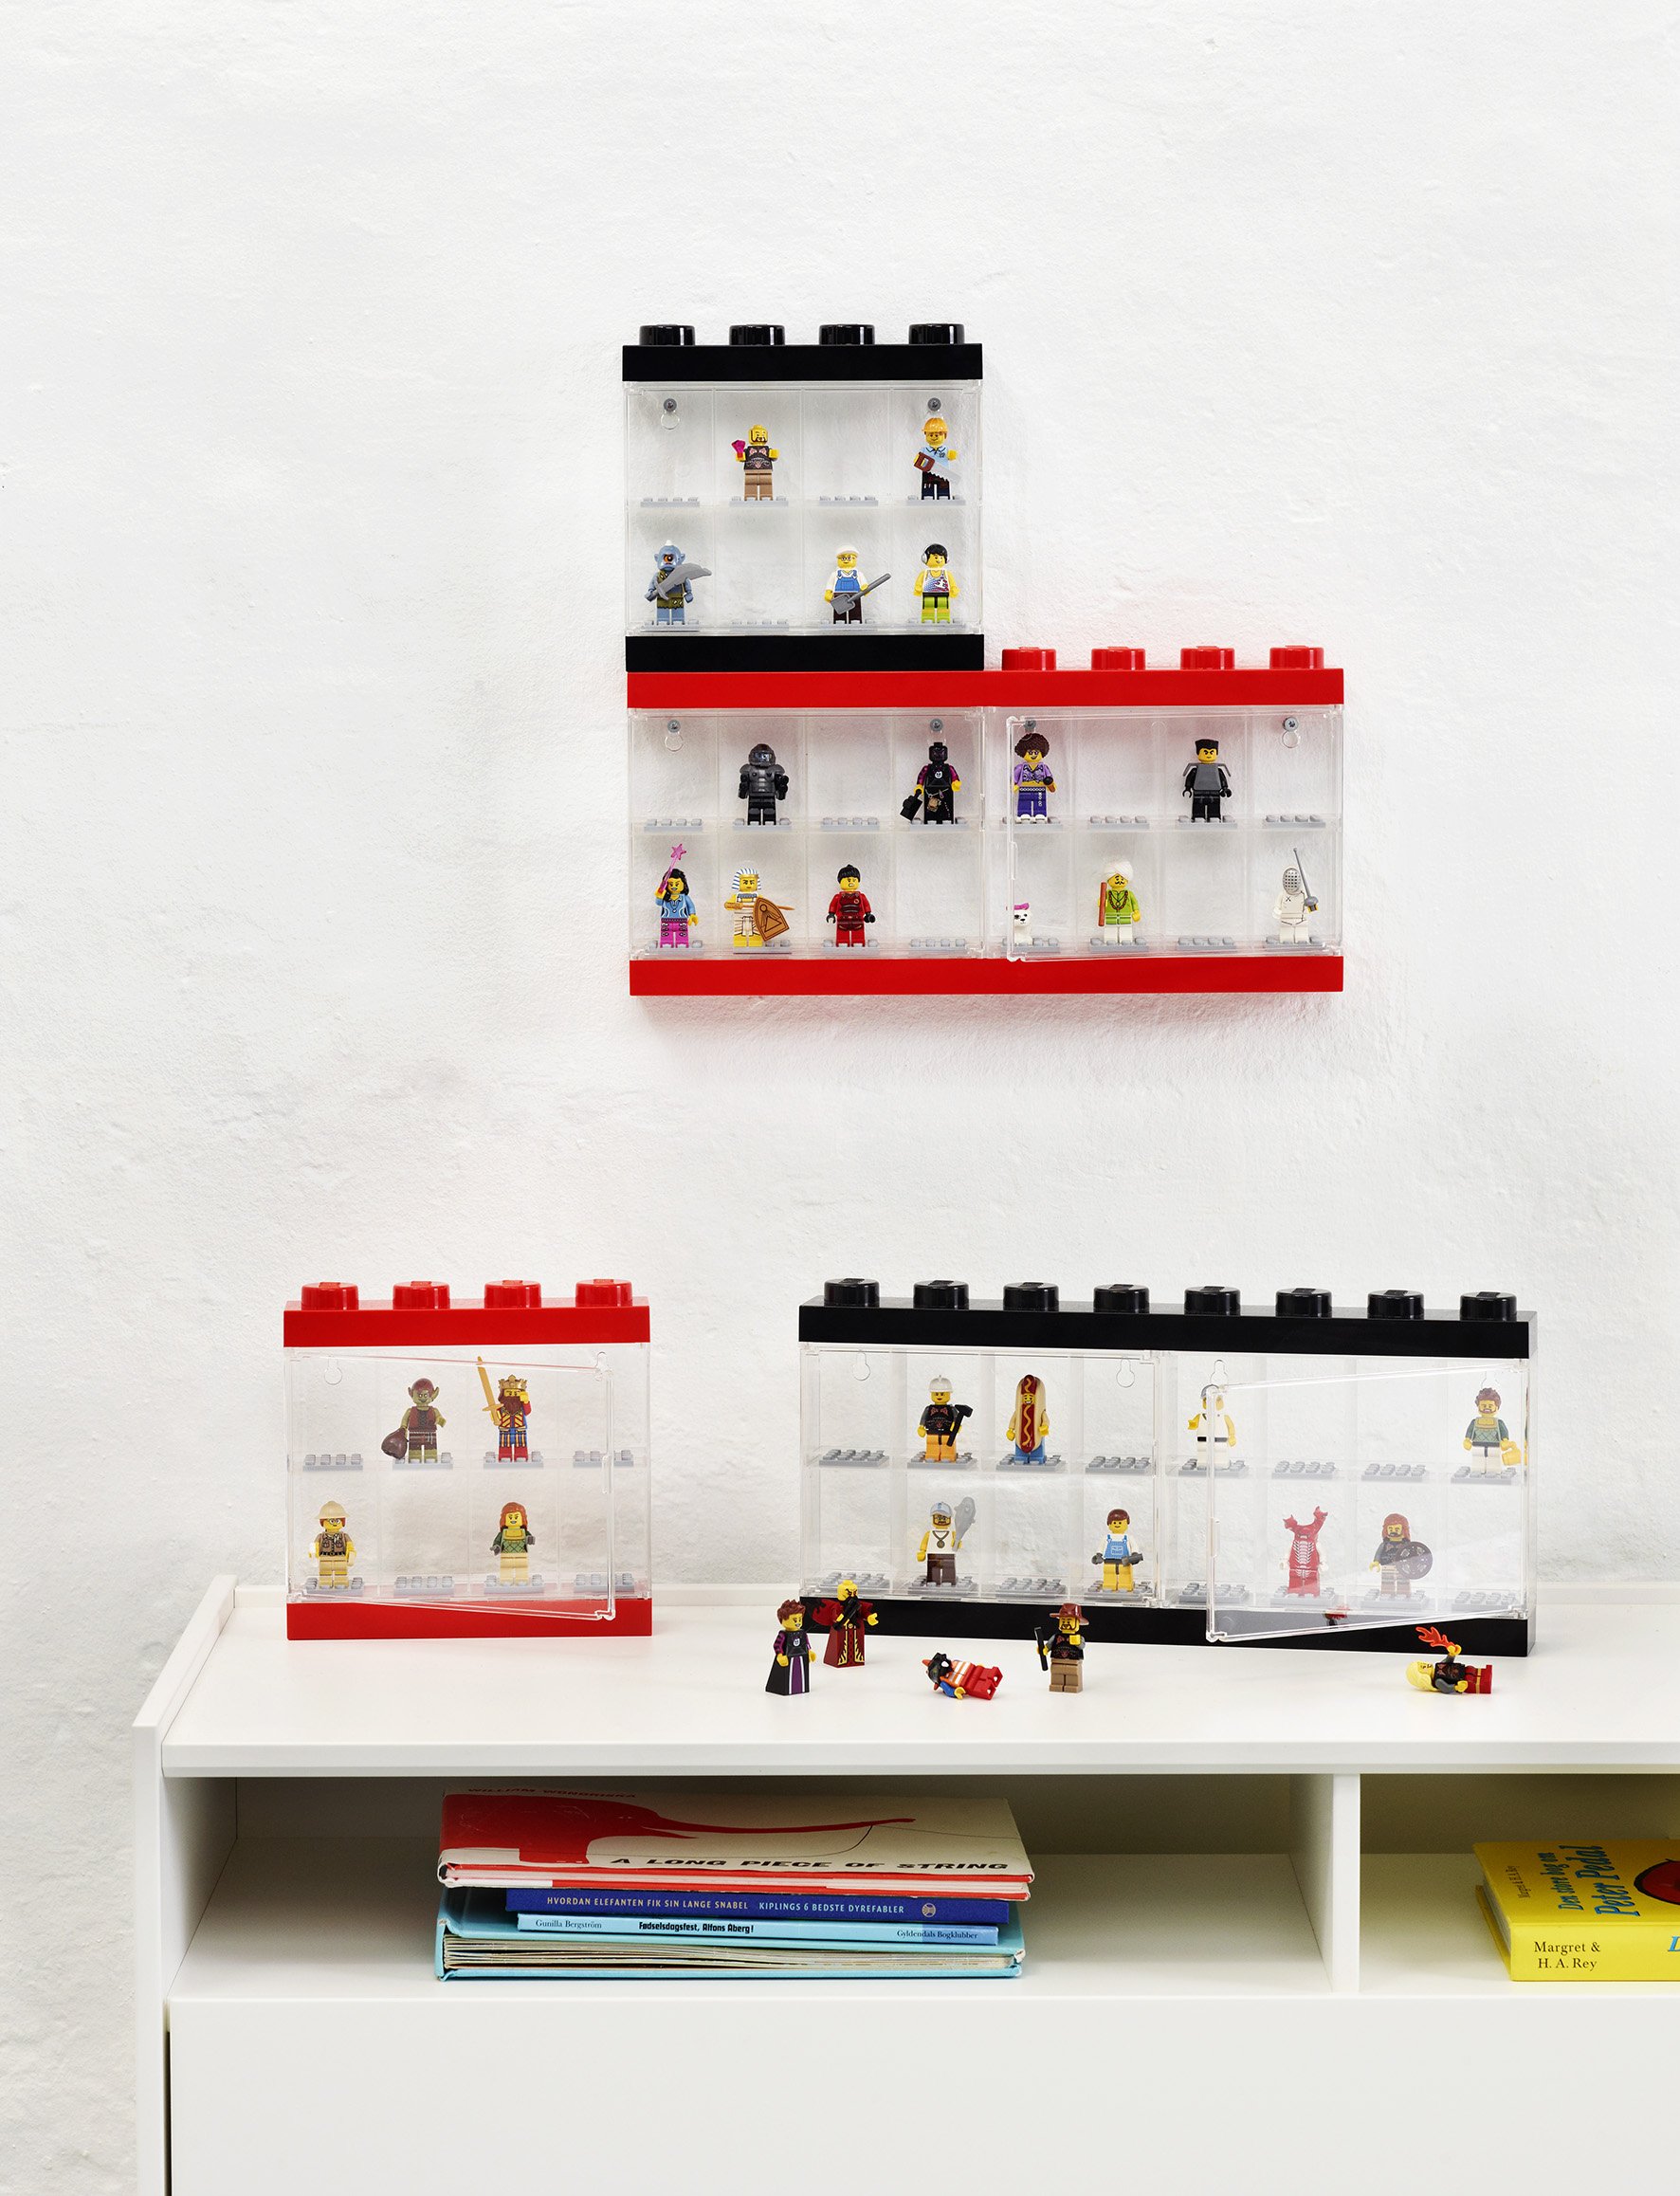 Room Copenhagen, LEGO Minifigure Display Case - Stackable Storage Container for Desktop or Wall Mounting Collectible Figurines - 7.52 x 7.24in - 4 Stud, Black - Holds 8 Standard Brick People